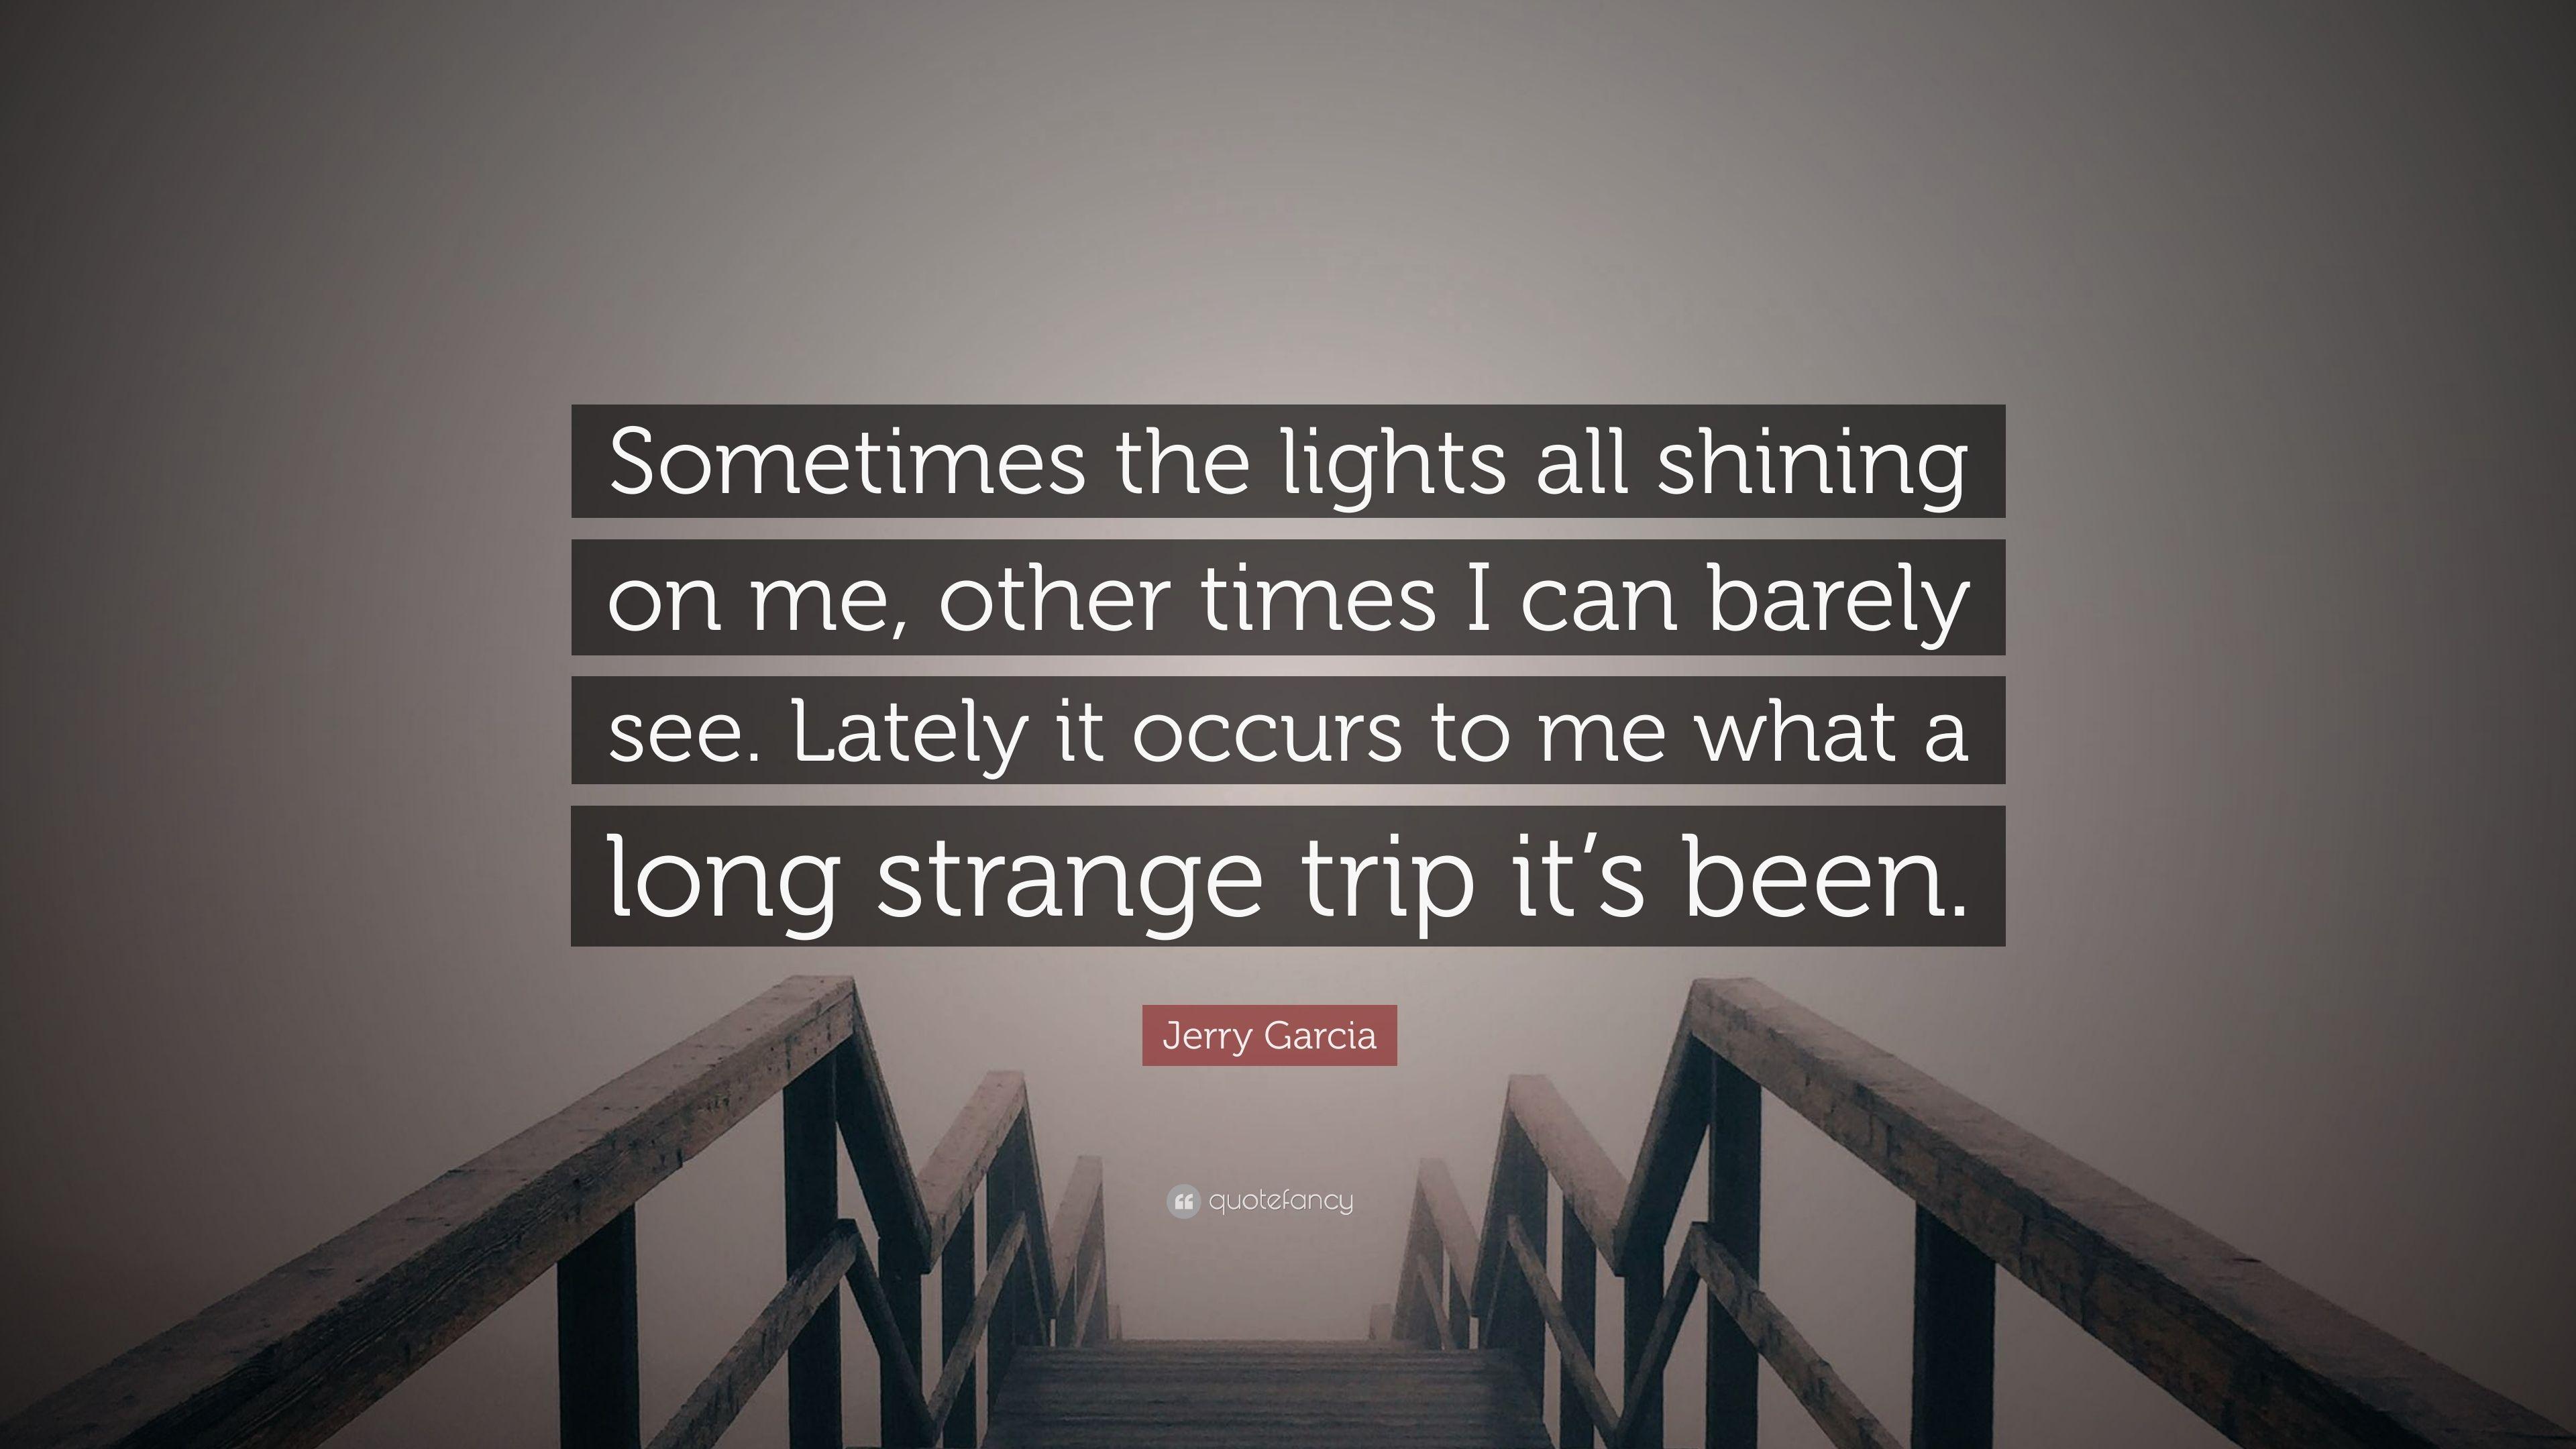 Jerry Garcia Quote: “Sometimes the lights all shining on me, other